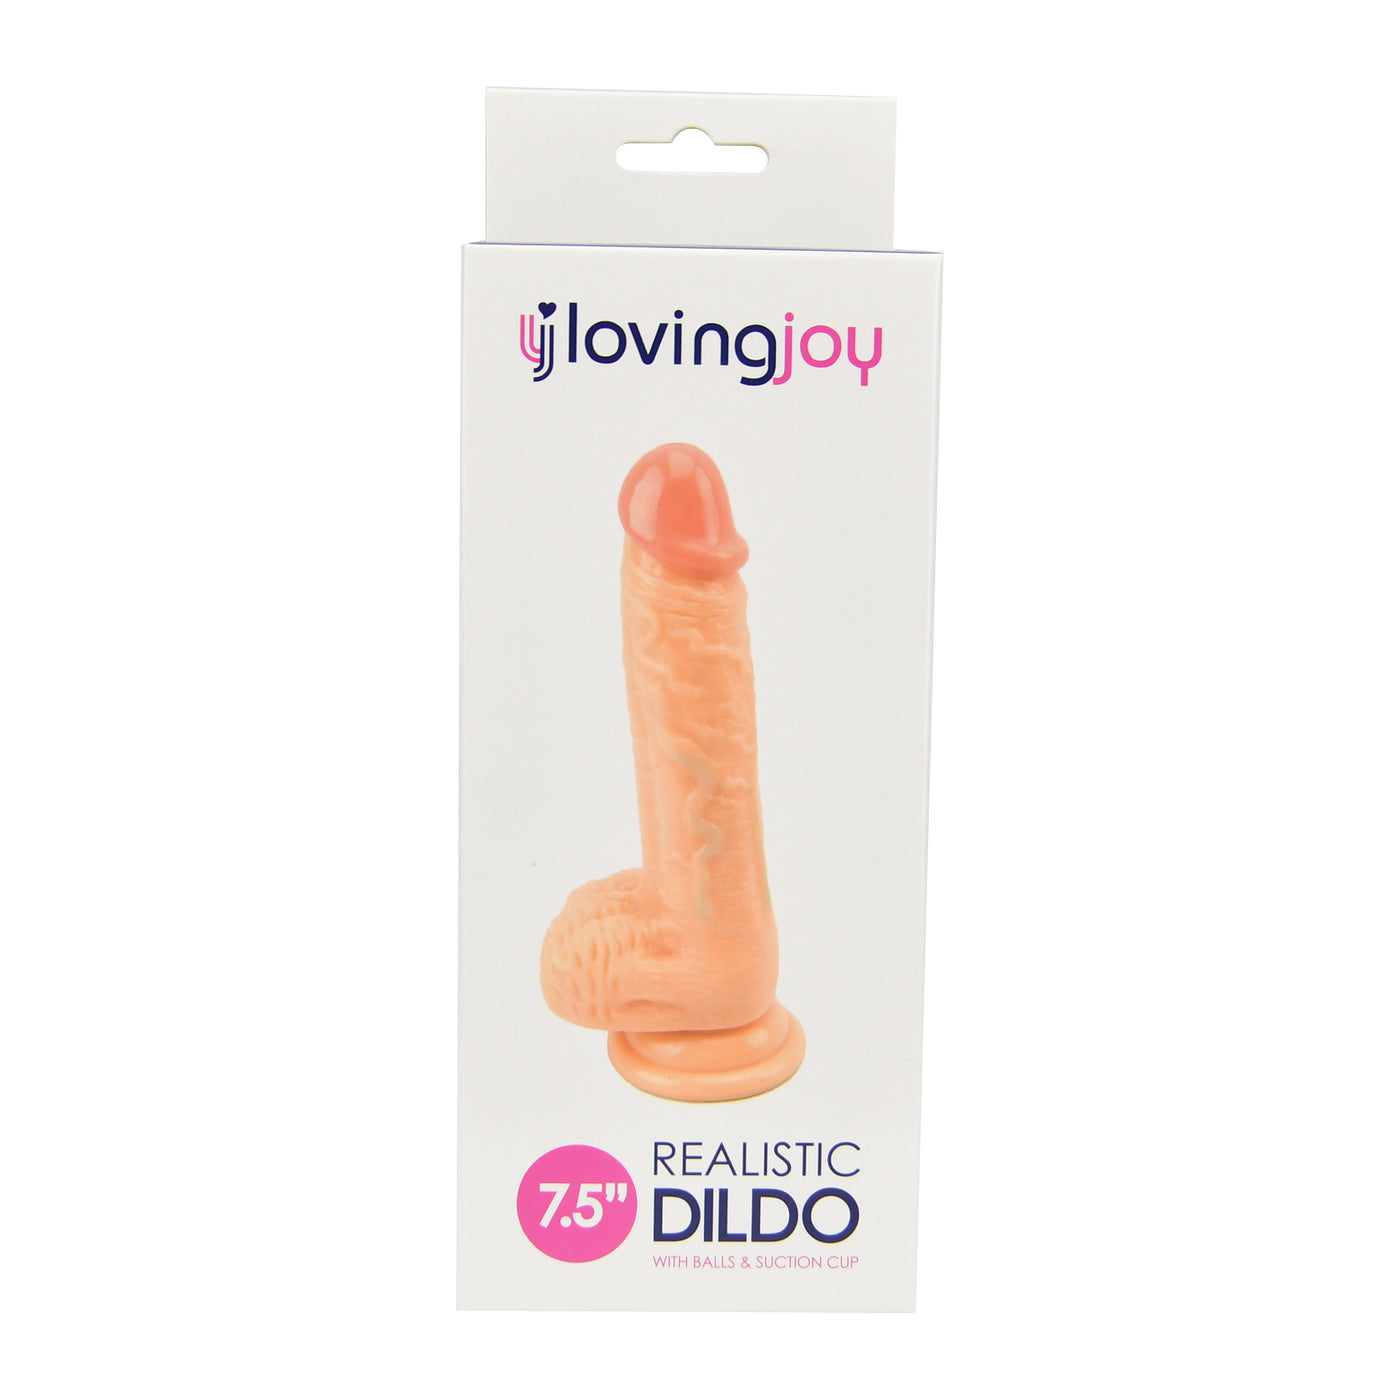 Loving Joy Realistic Dildo with Balls and Suction Cup 7.5 Inch